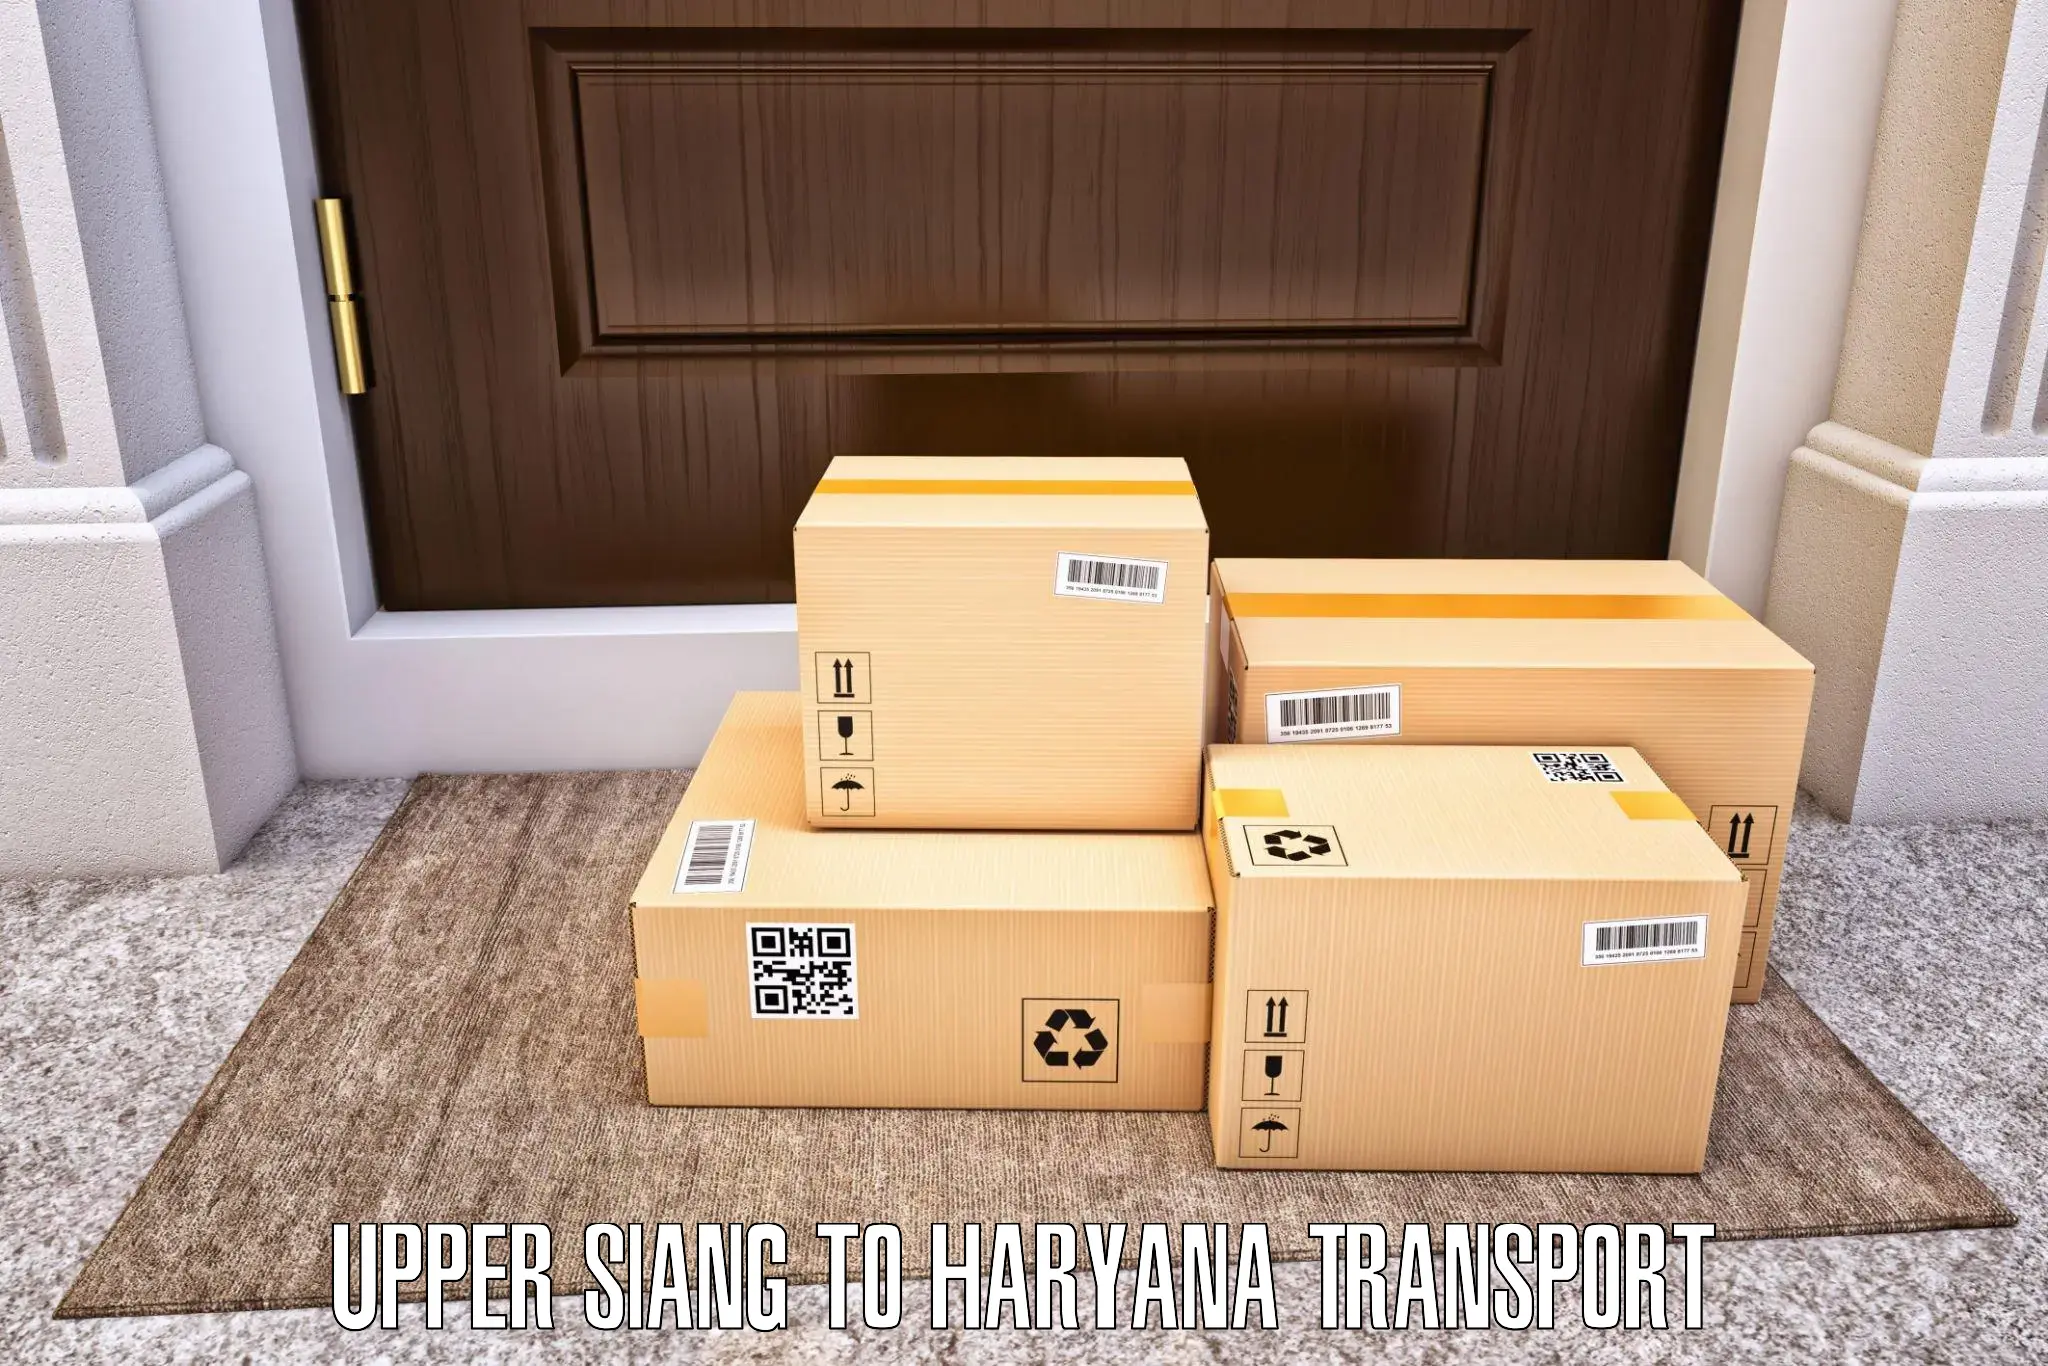 Parcel transport services Upper Siang to Gurgaon